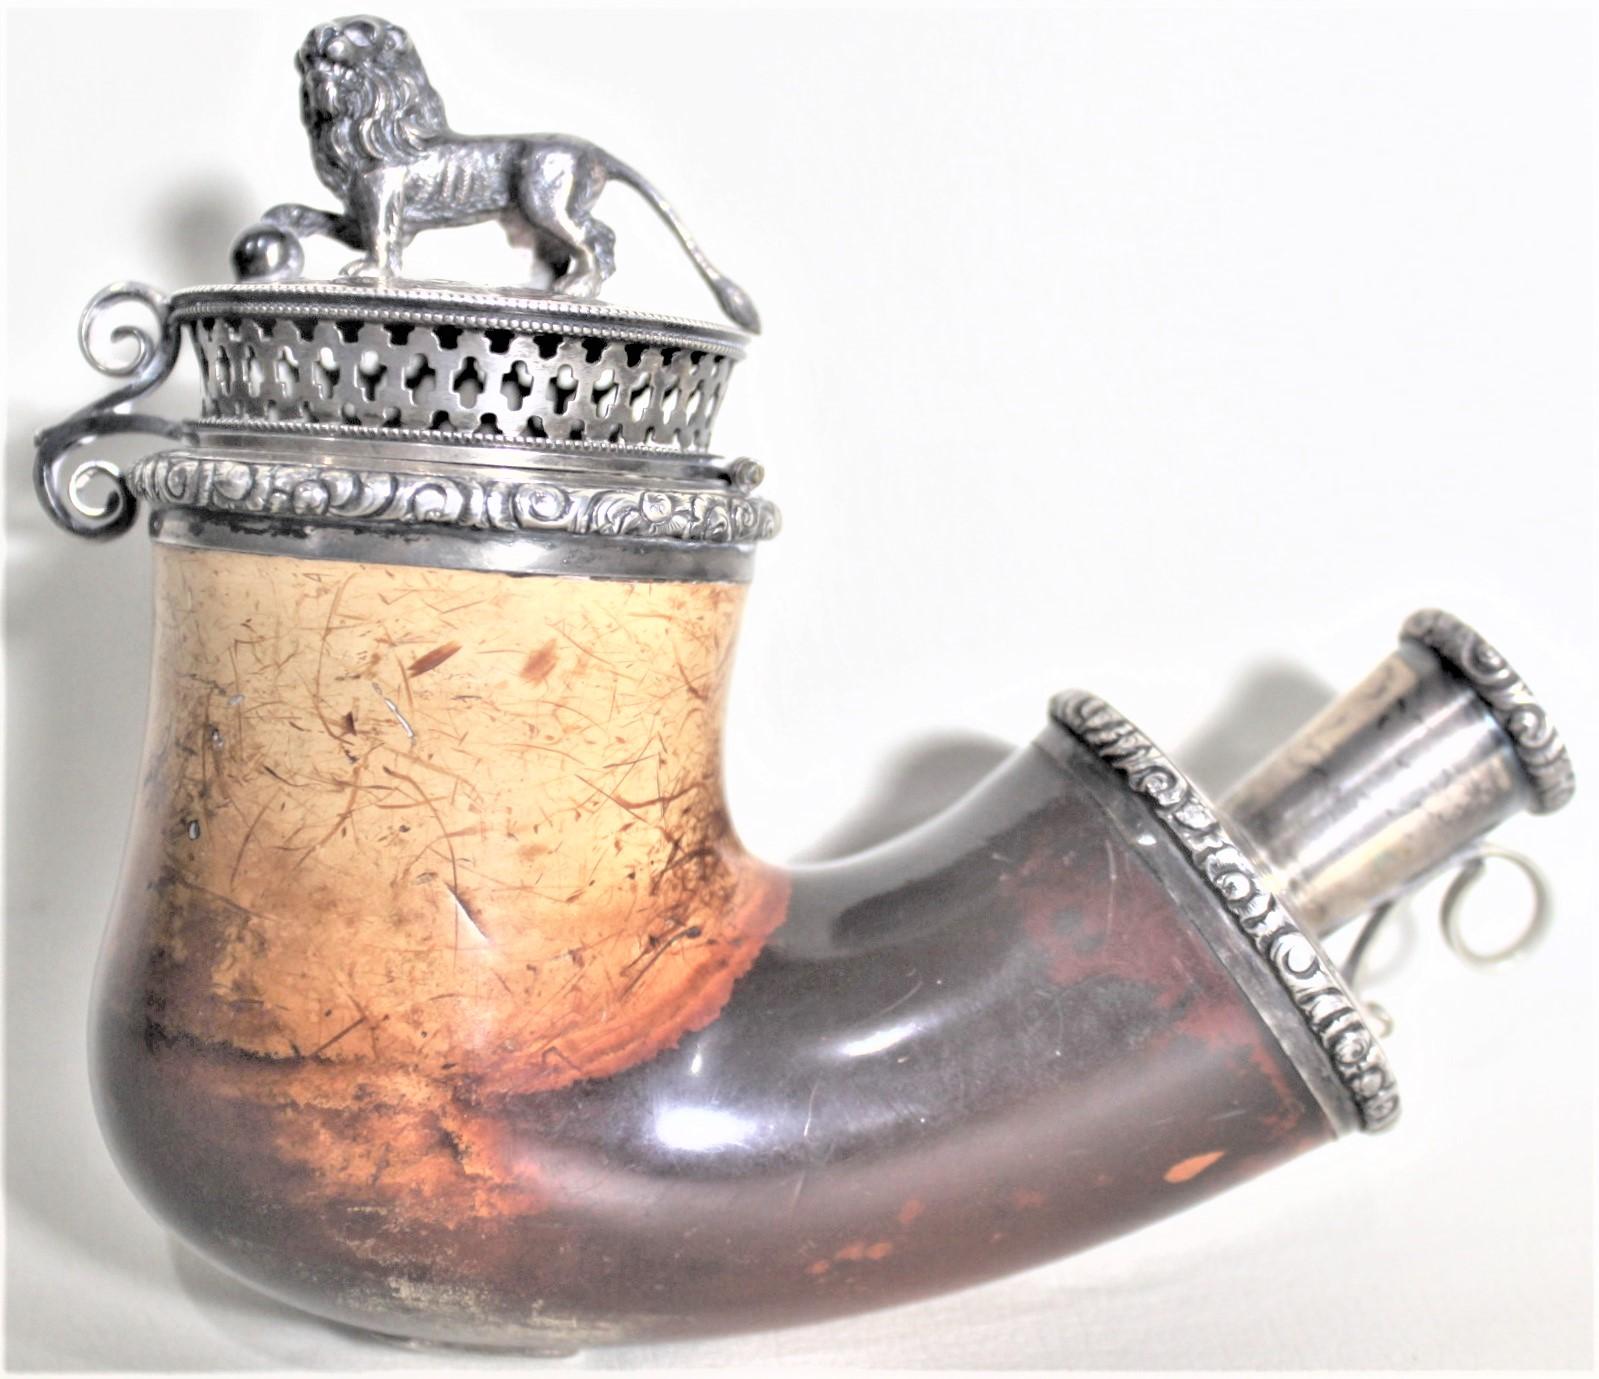 This antique meerschaum smoking pipe bowl is unsigned, but presumed to have been made in Germany or Austria in approximately 1900 in the period Biedermeier style. The body of the pipe is composed of meerschaum and has silver mounts featuring a